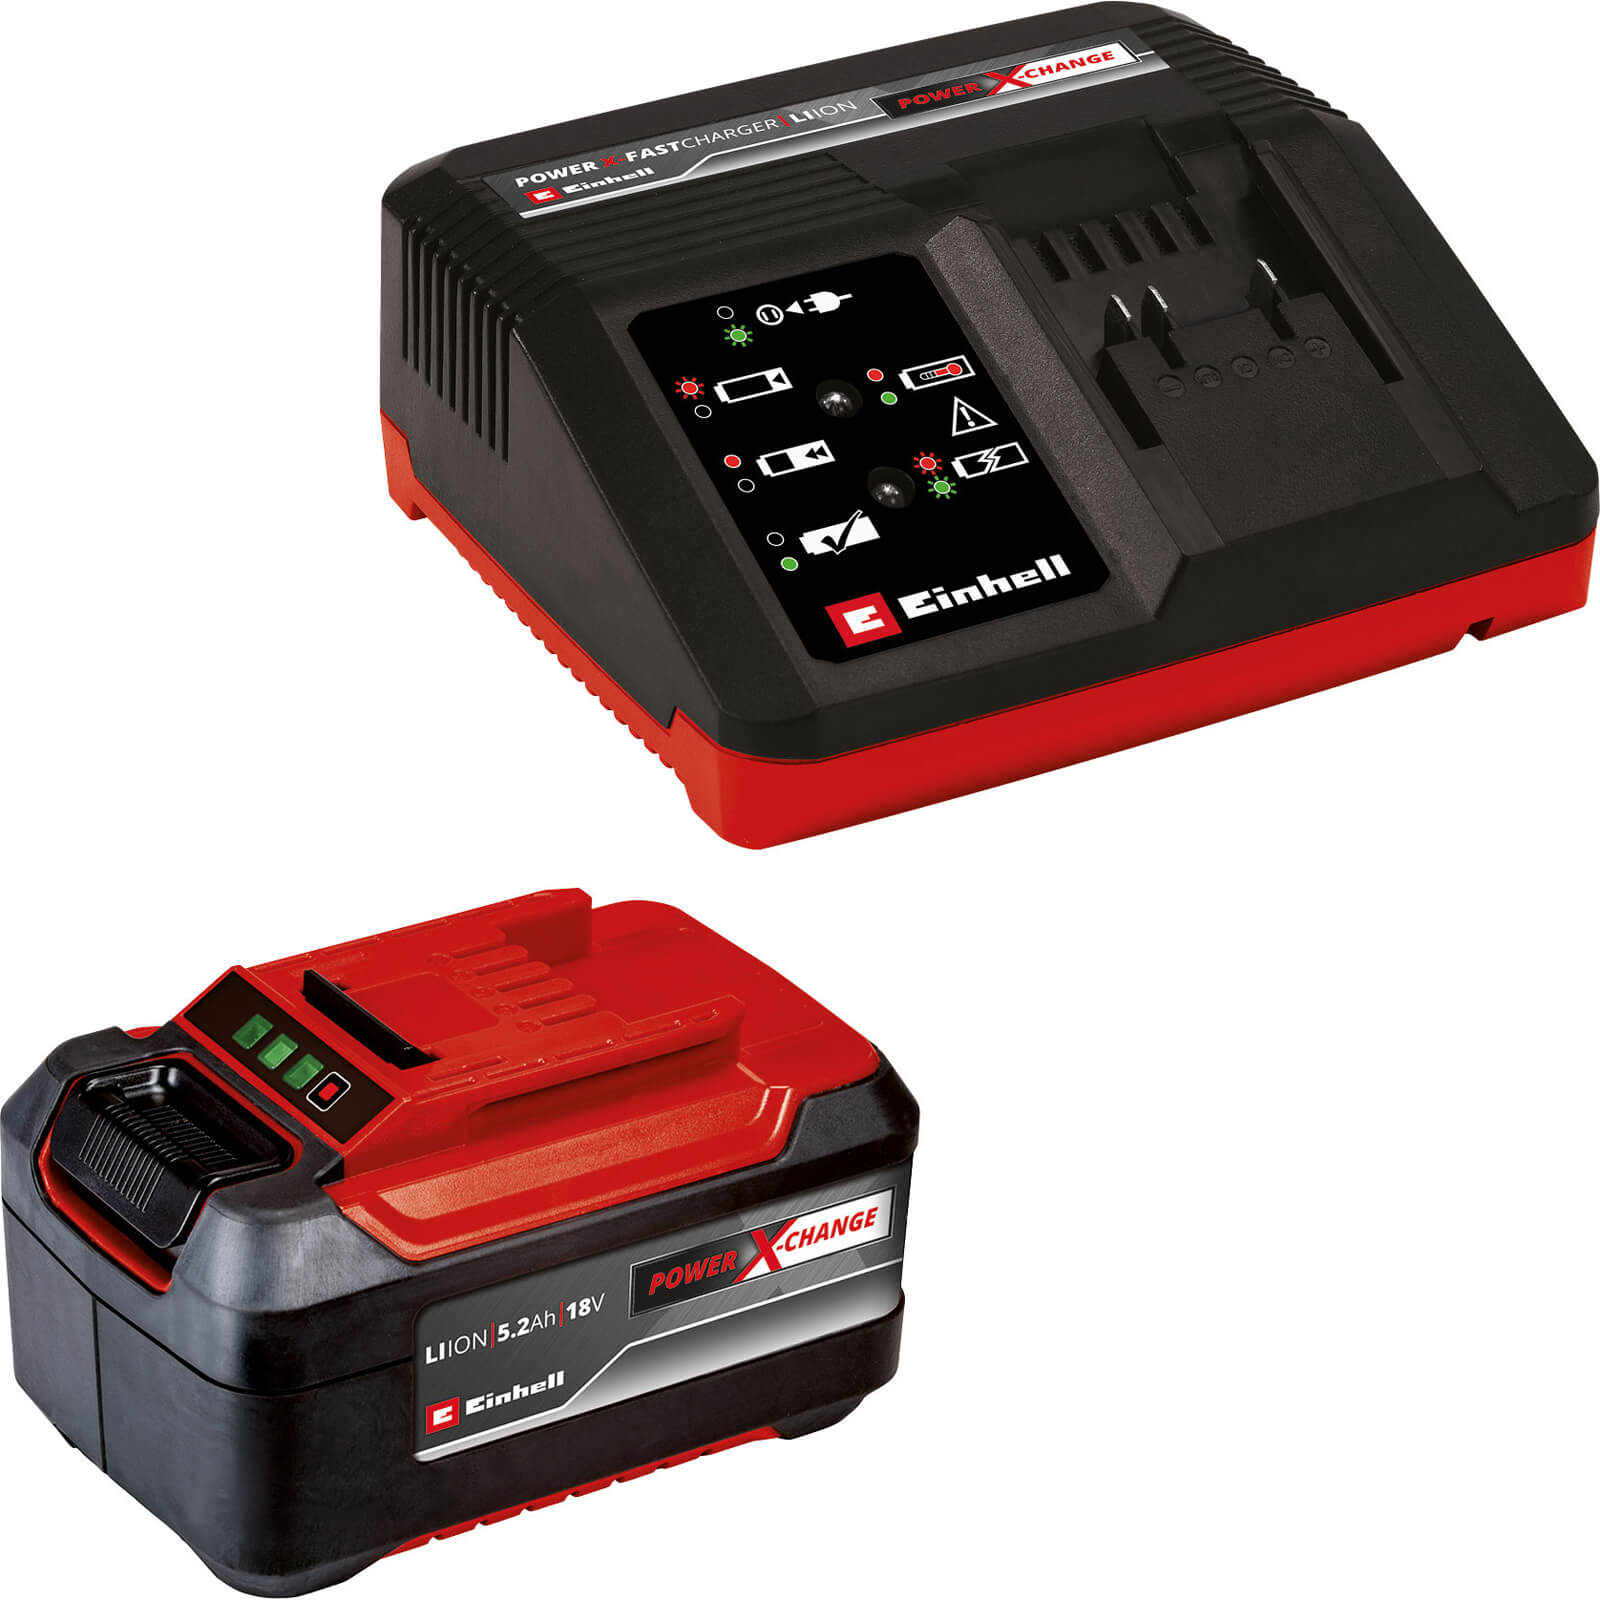 Einhell Genuine 18v Power X-Change Plus 5.2ah Li-ion Battery and Charger 5.2ah